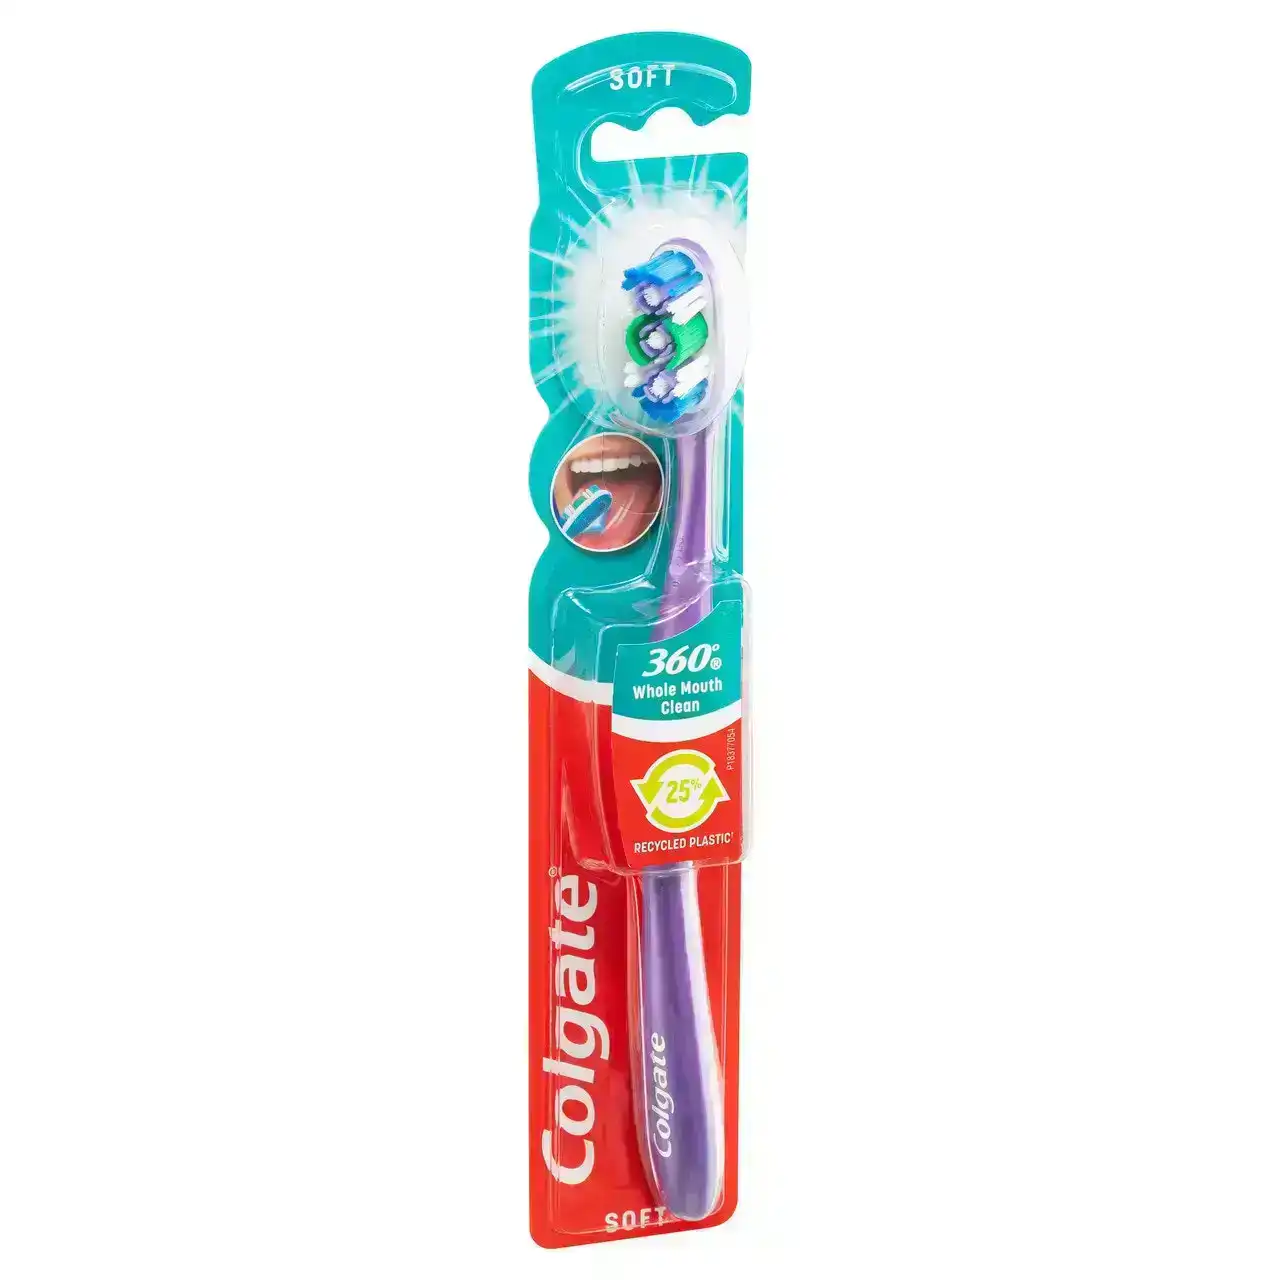 Colgate 360o Whole Mouth Clean Manual Toothbrush, 1 Pack, Soft Bristles